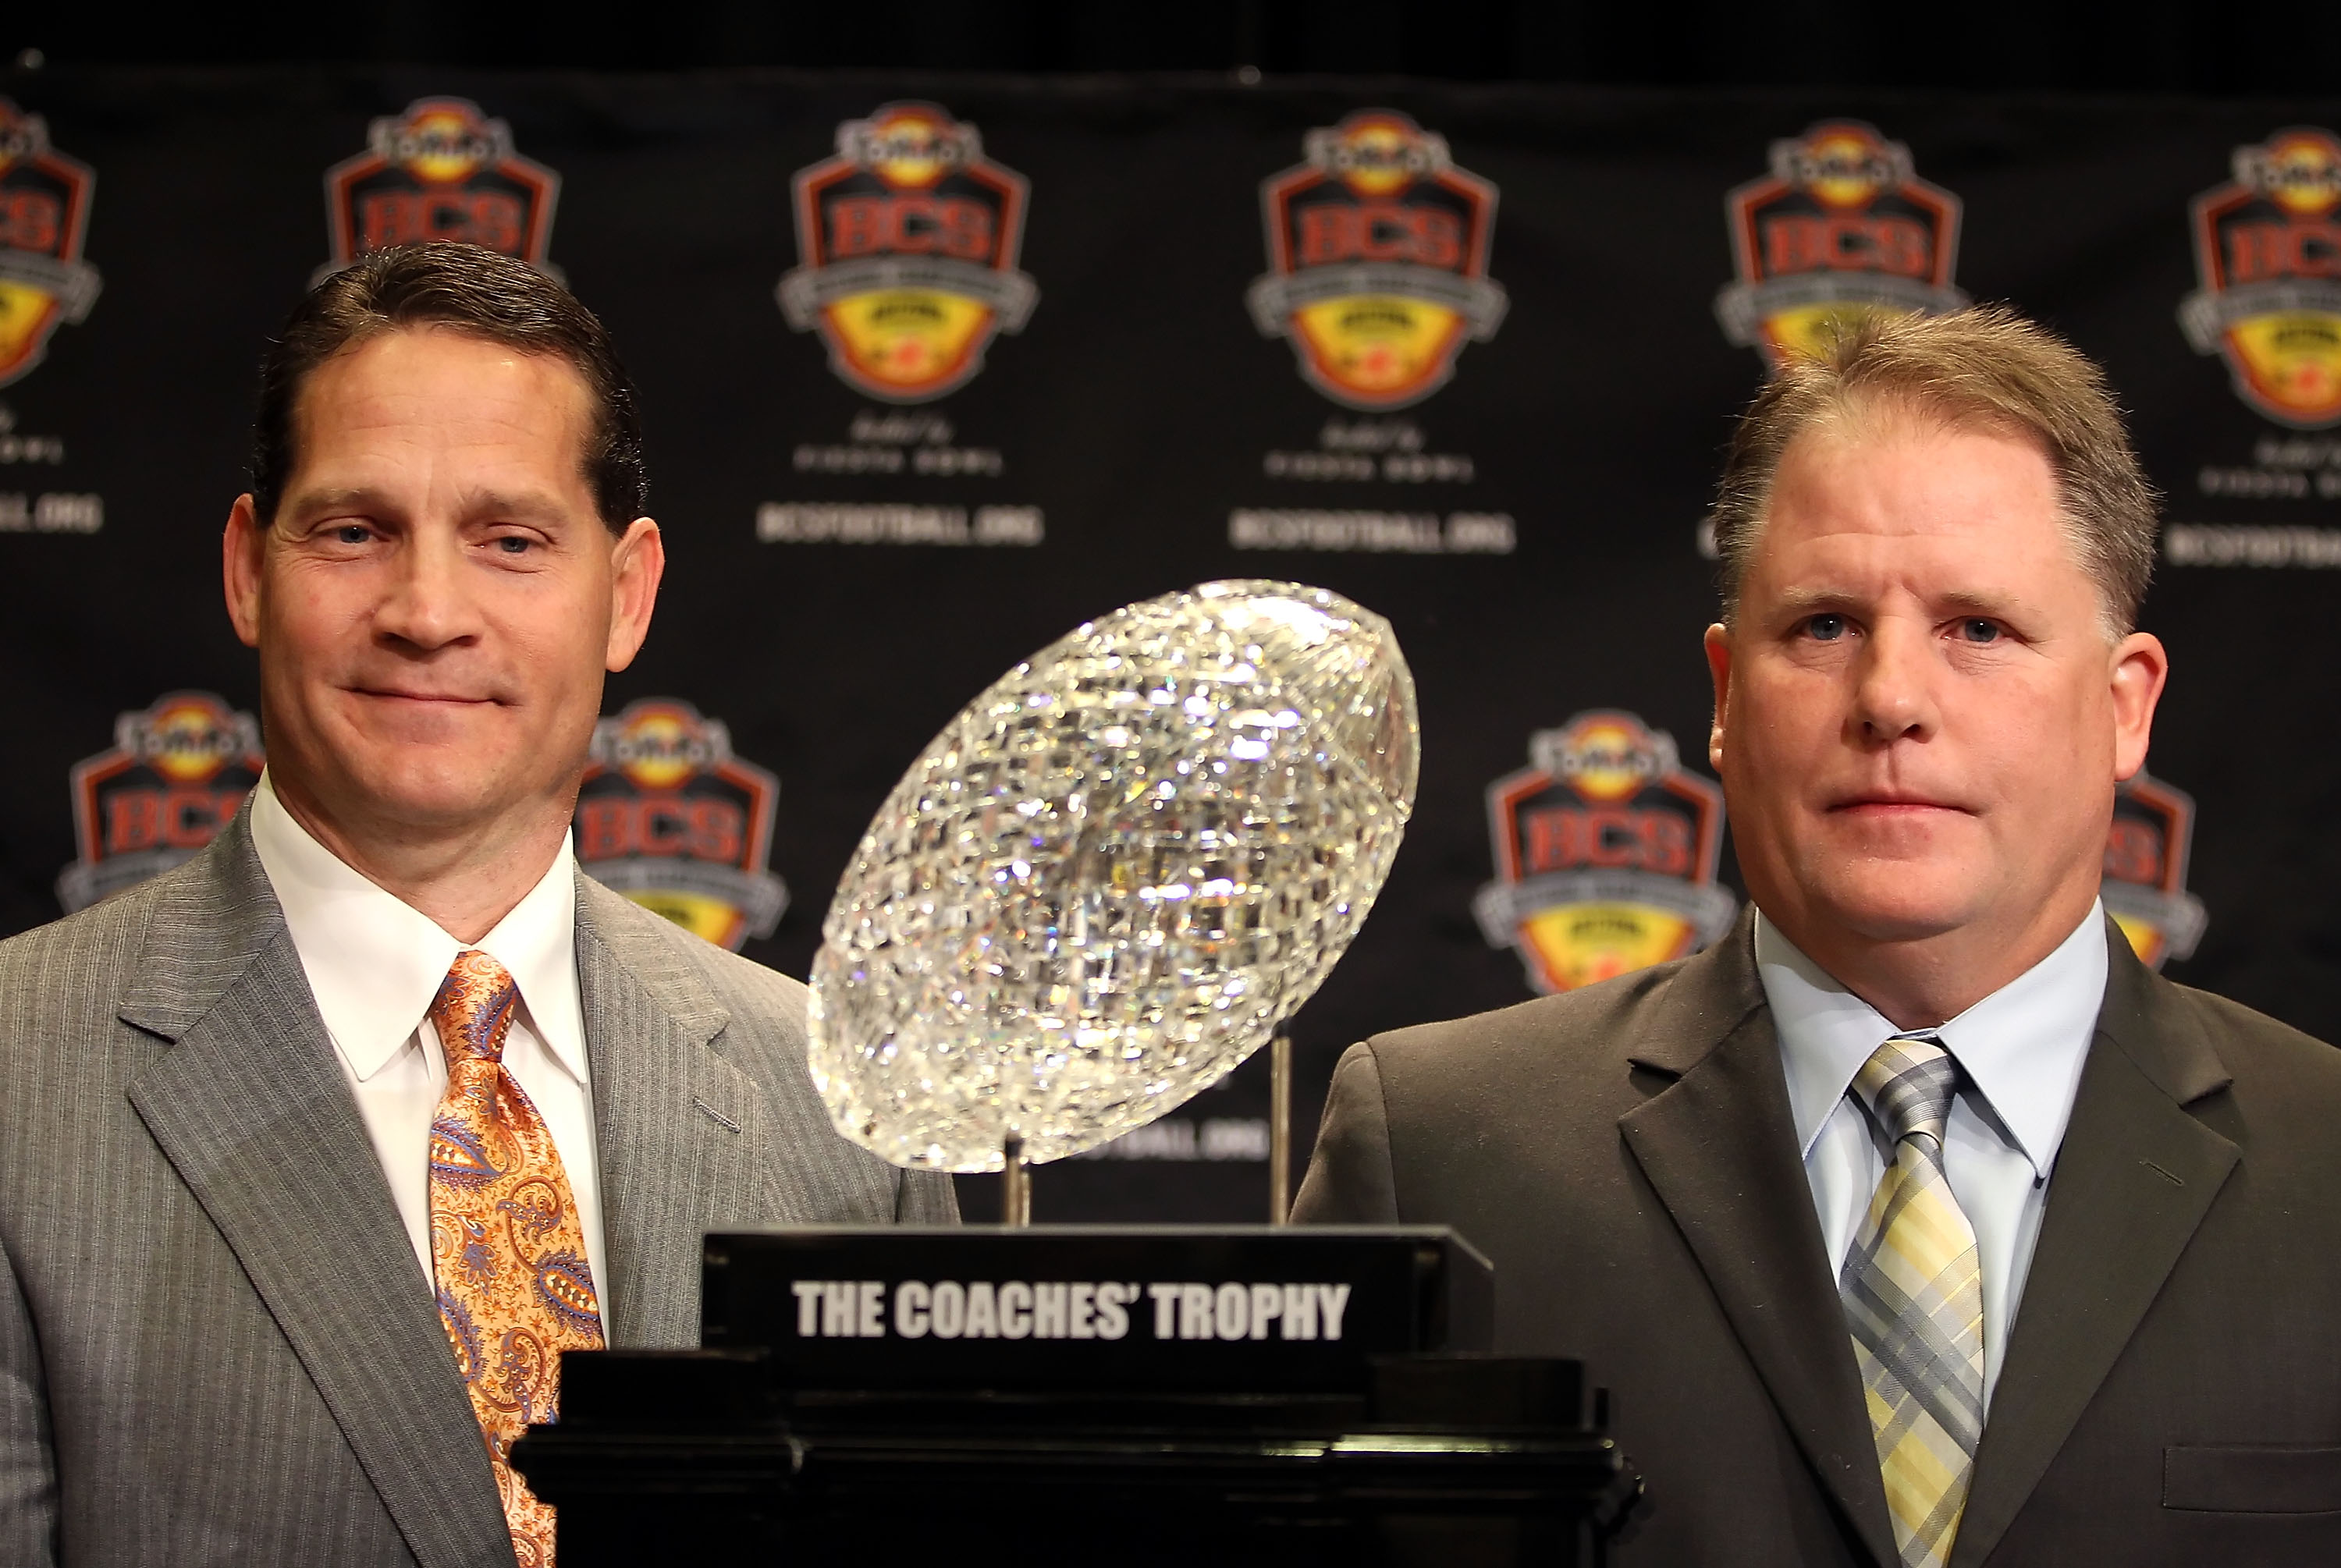 SCOTTSDALE, AZ - JANUARY 09:  Head coaches Gene Chizik of the Auburn Tigers and Chip Kelly of the Oregon Ducks pose together with the coaches trophy during a press conference for the Tostitos BCS National Championship Game at the JW Marriott Camelback Inn